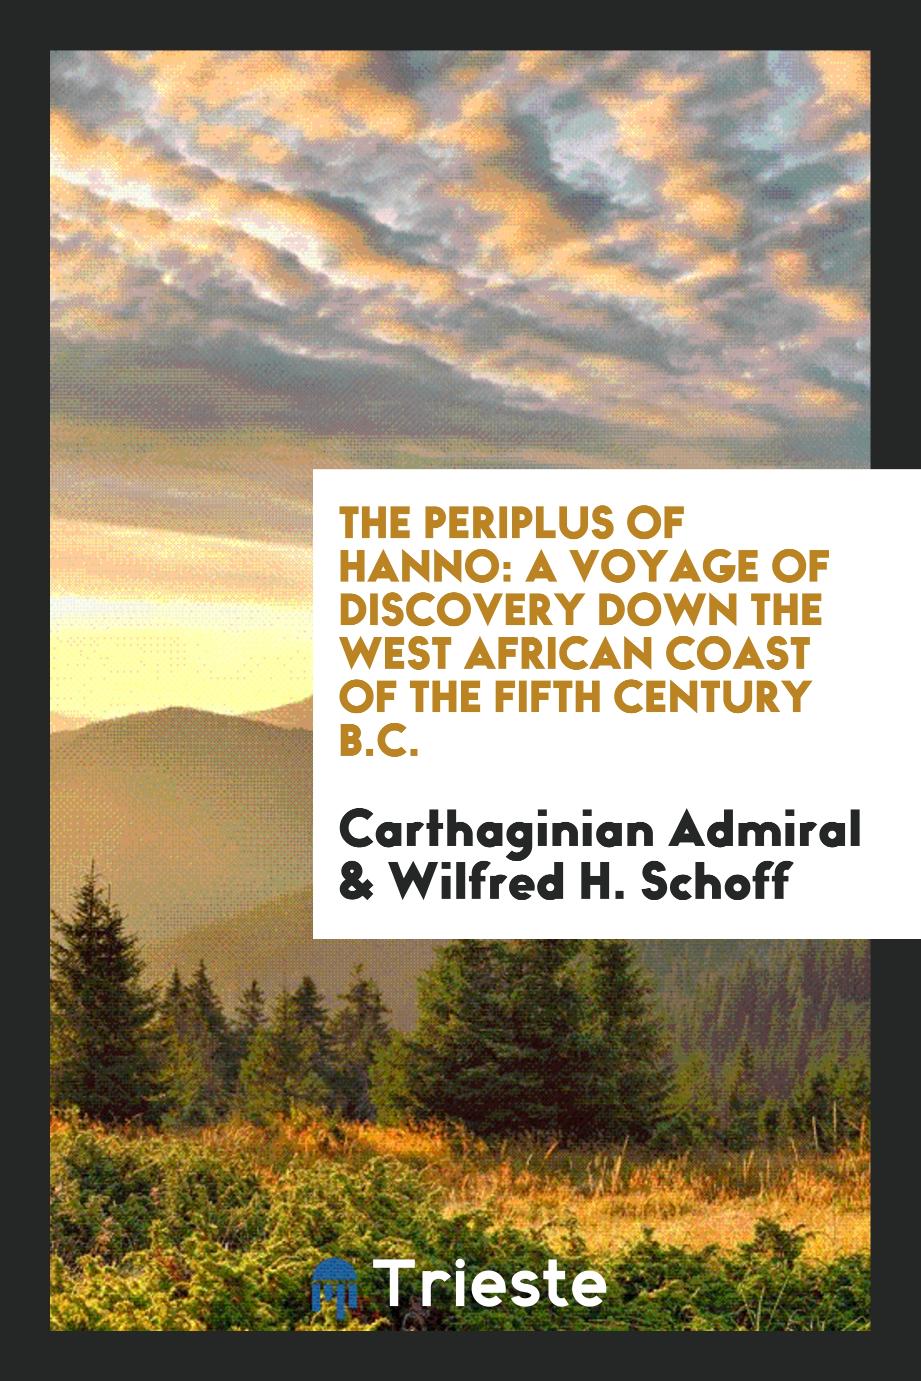 The Periplus of Hanno: A Voyage of Discovery Down the West African Coast of the fifth century B.C.